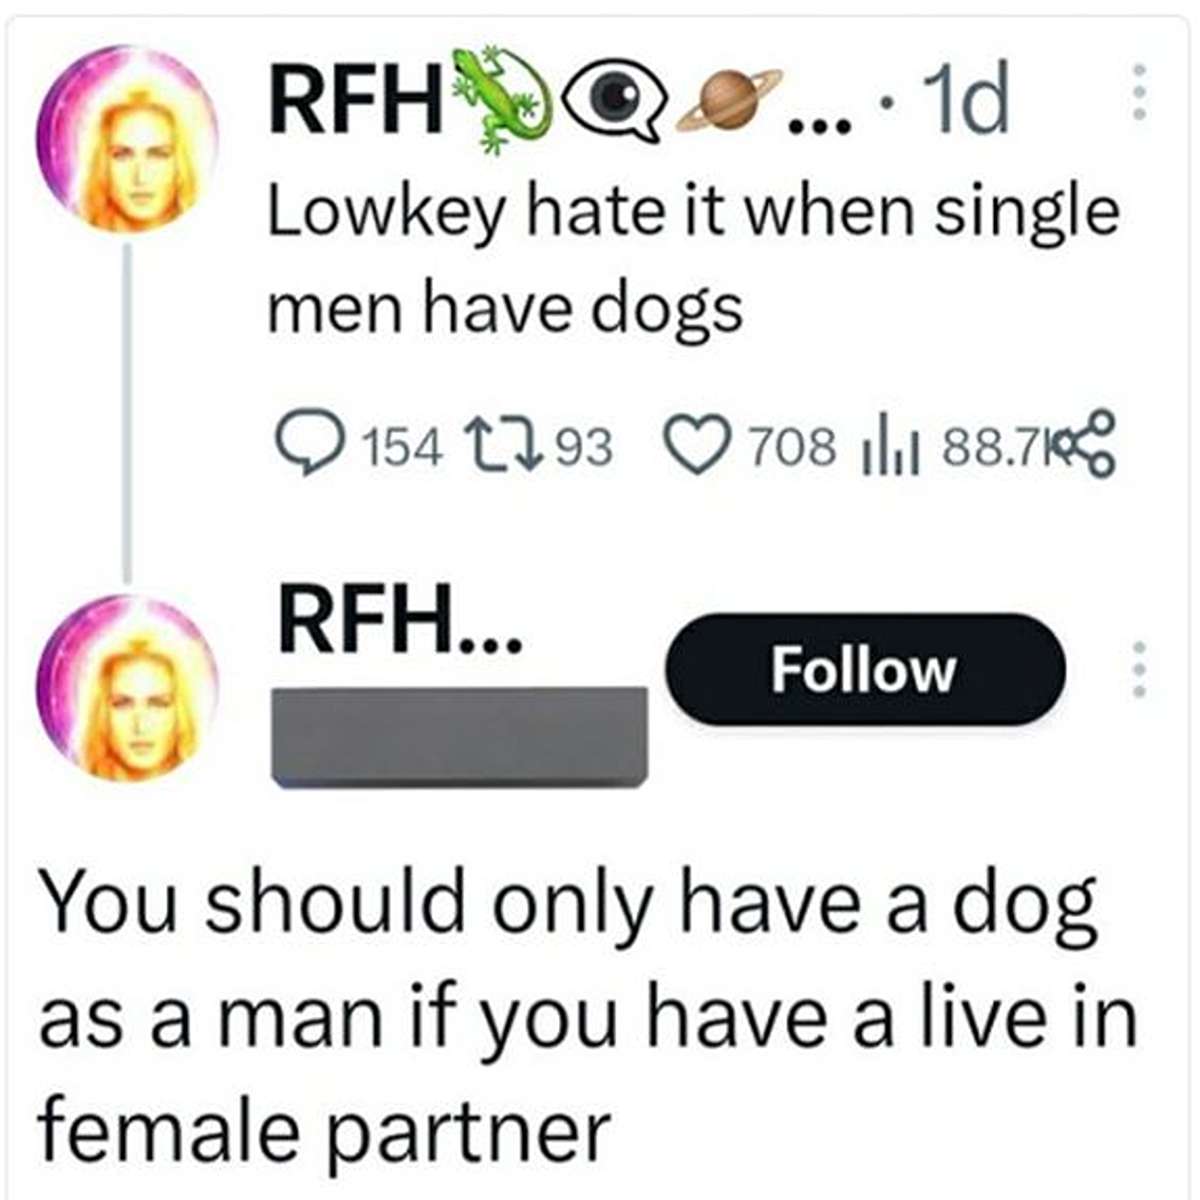 delusional people - number - Rfh .. 1d Lowkey hate it when single men have dogs 154 193 Rfh... 708 11 88.71 You should only have a dog as a man if you have a live in female partner